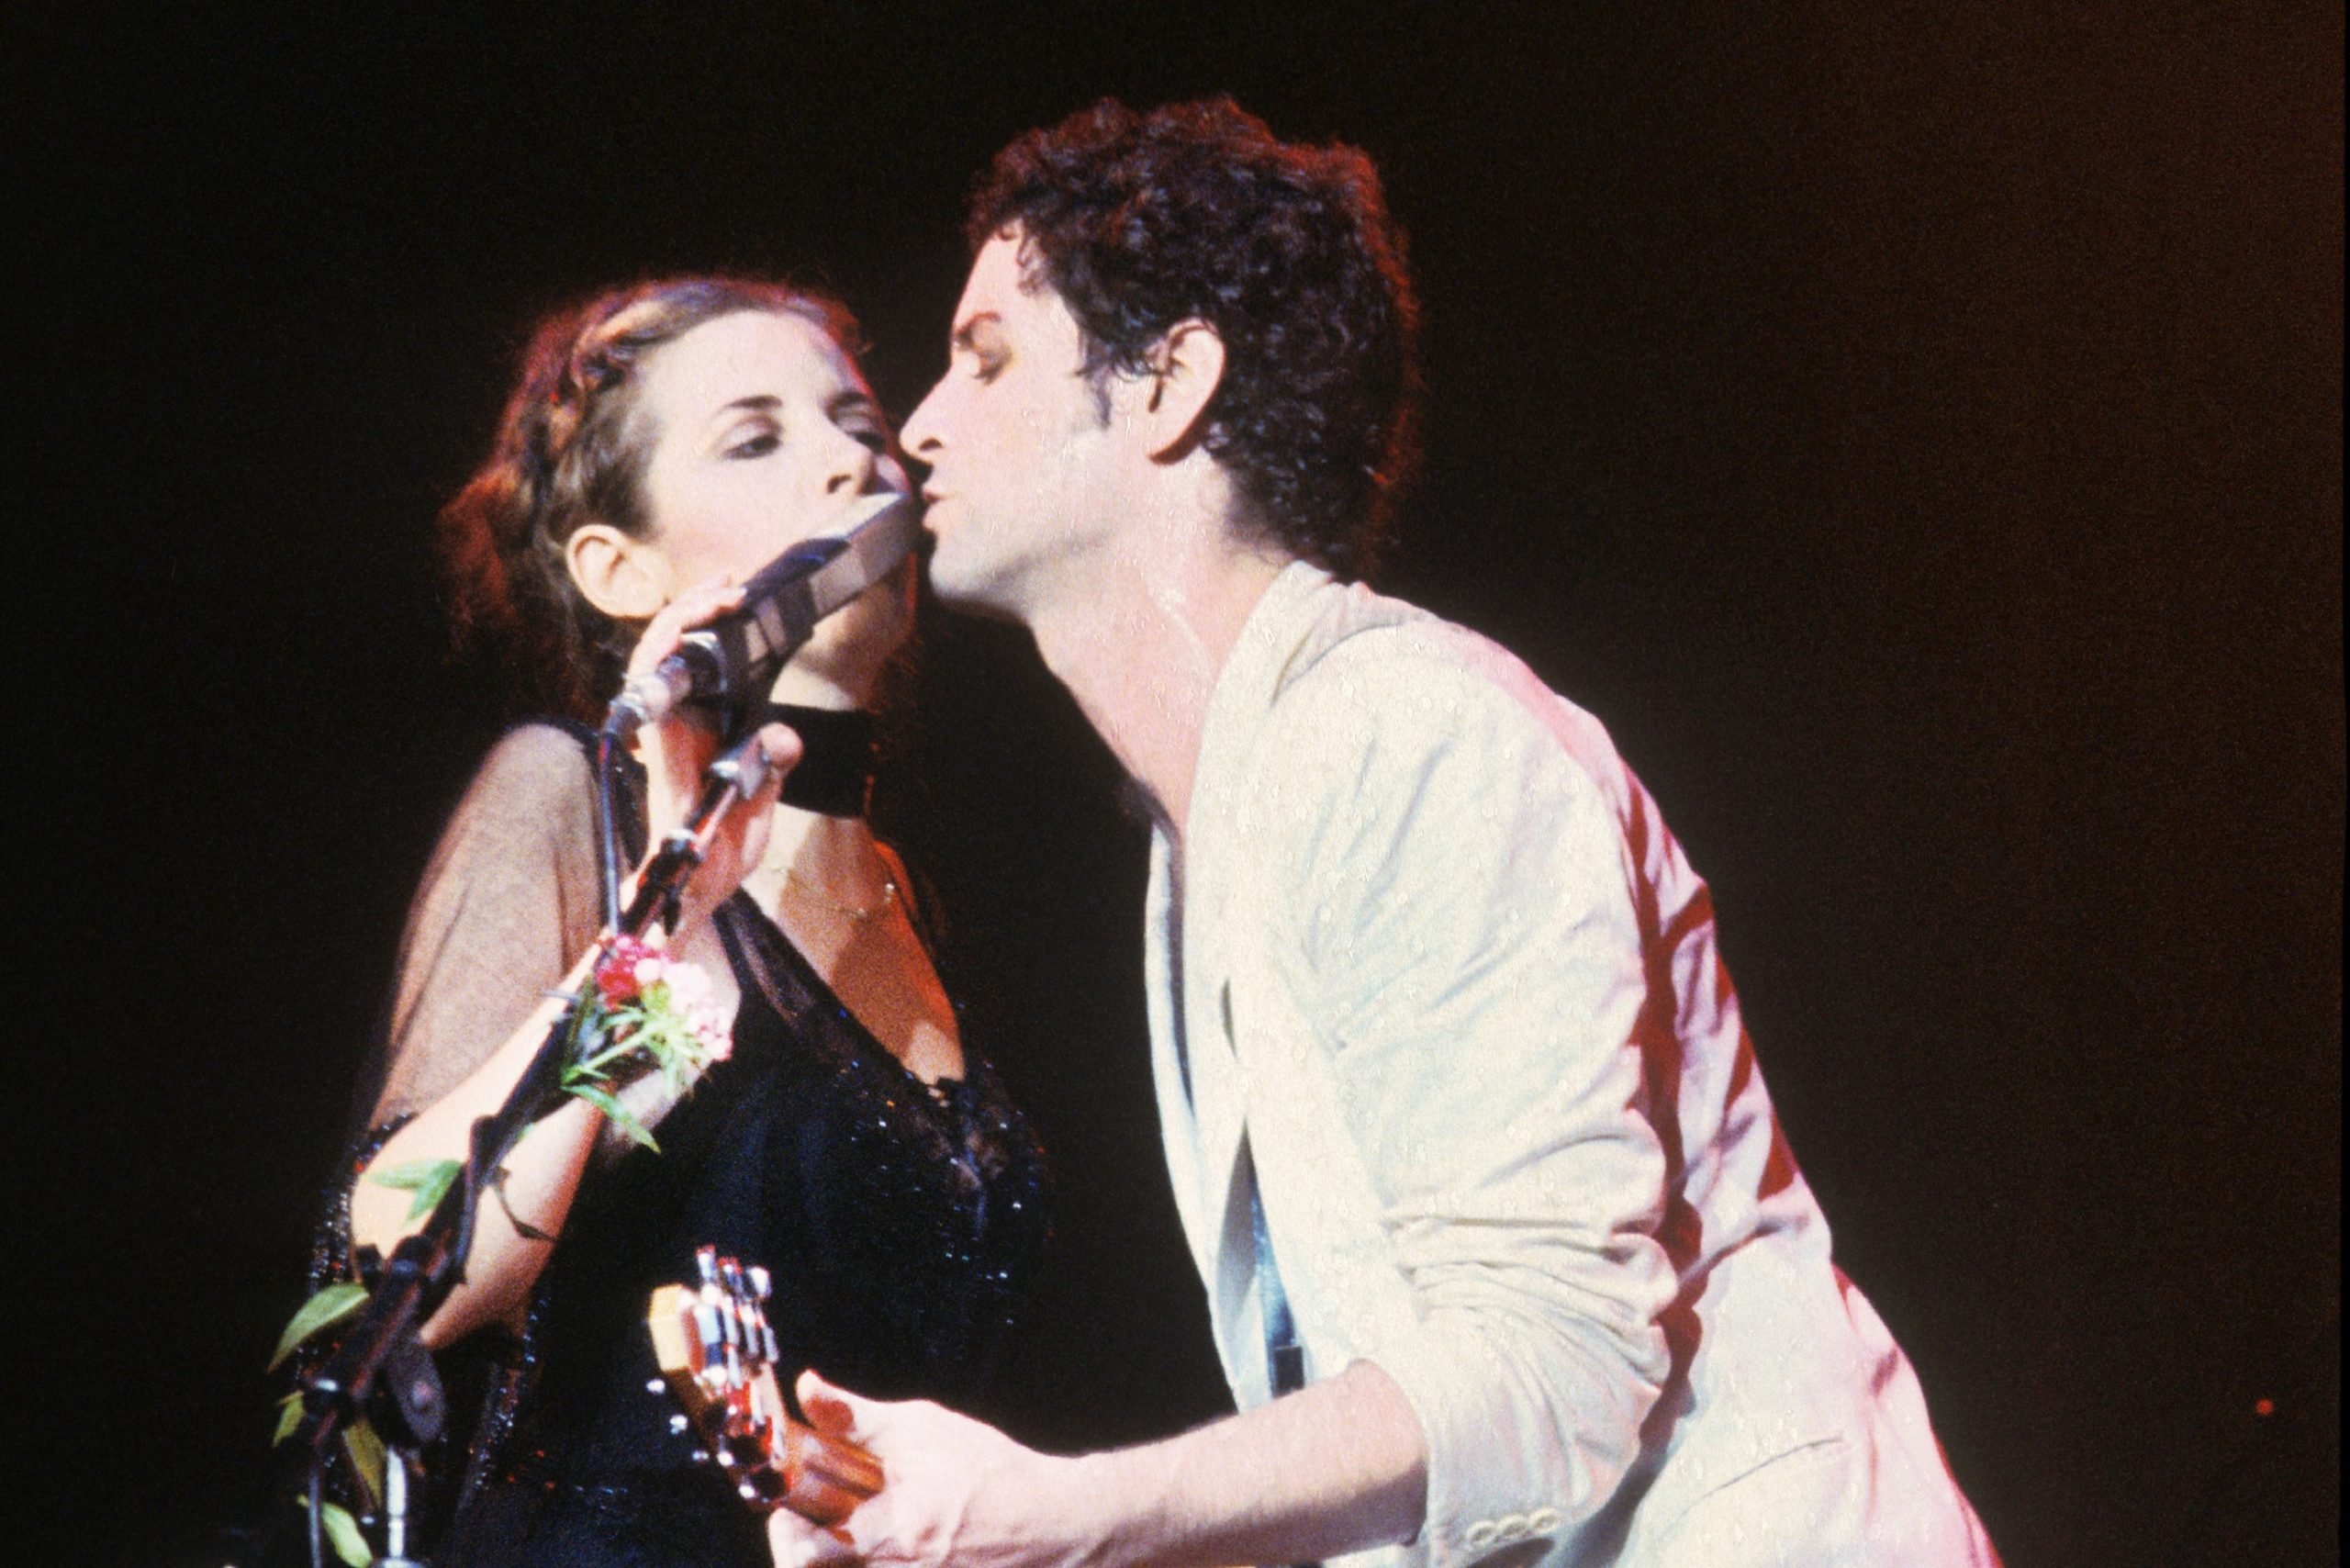 Lindsey Buckingham Said He Was ‘Stupid’ to Insist That Stevie Nicks Joined Fleetwood Mac